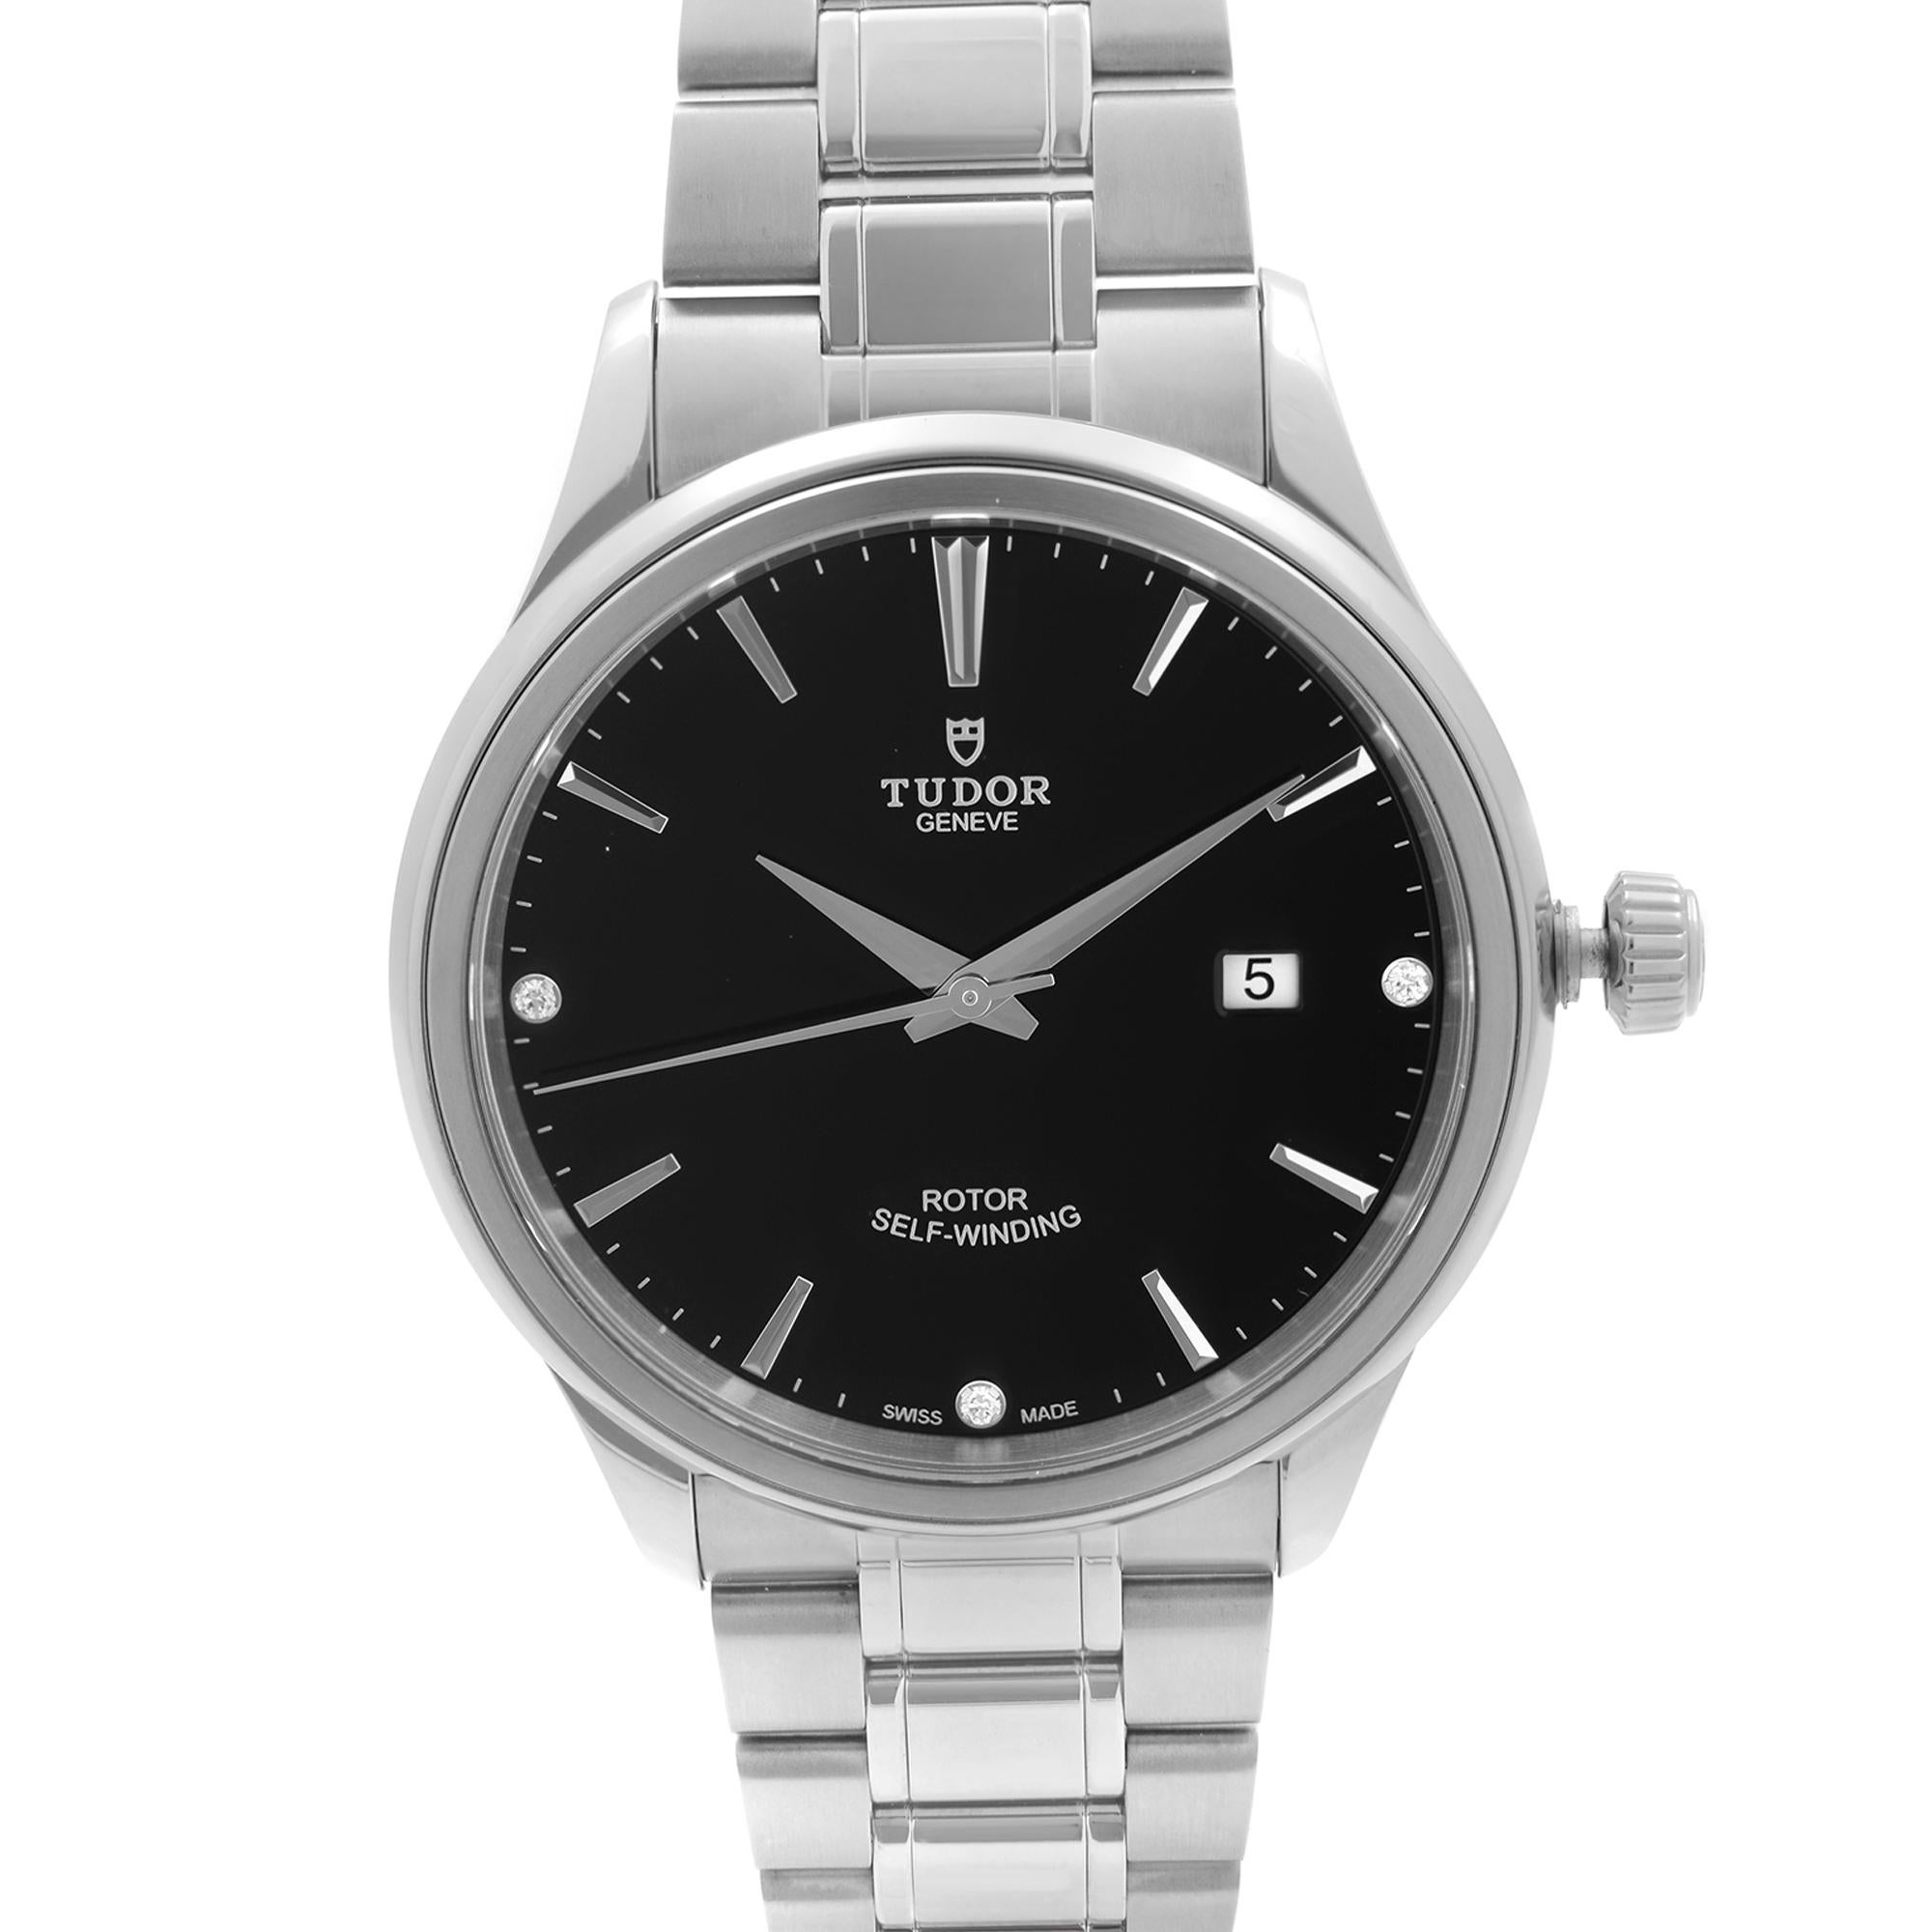 Pre-owned Tudor Style Stainless Steel Black Diamond Dial Automatic Mens Watch M12700-0004. This Beautiful Timepiece is Powered by Mechanical (Automatic) Movement And Features: Round Stainless Steele Case And Bracelet, Fixed Stainless Steel Bezel,